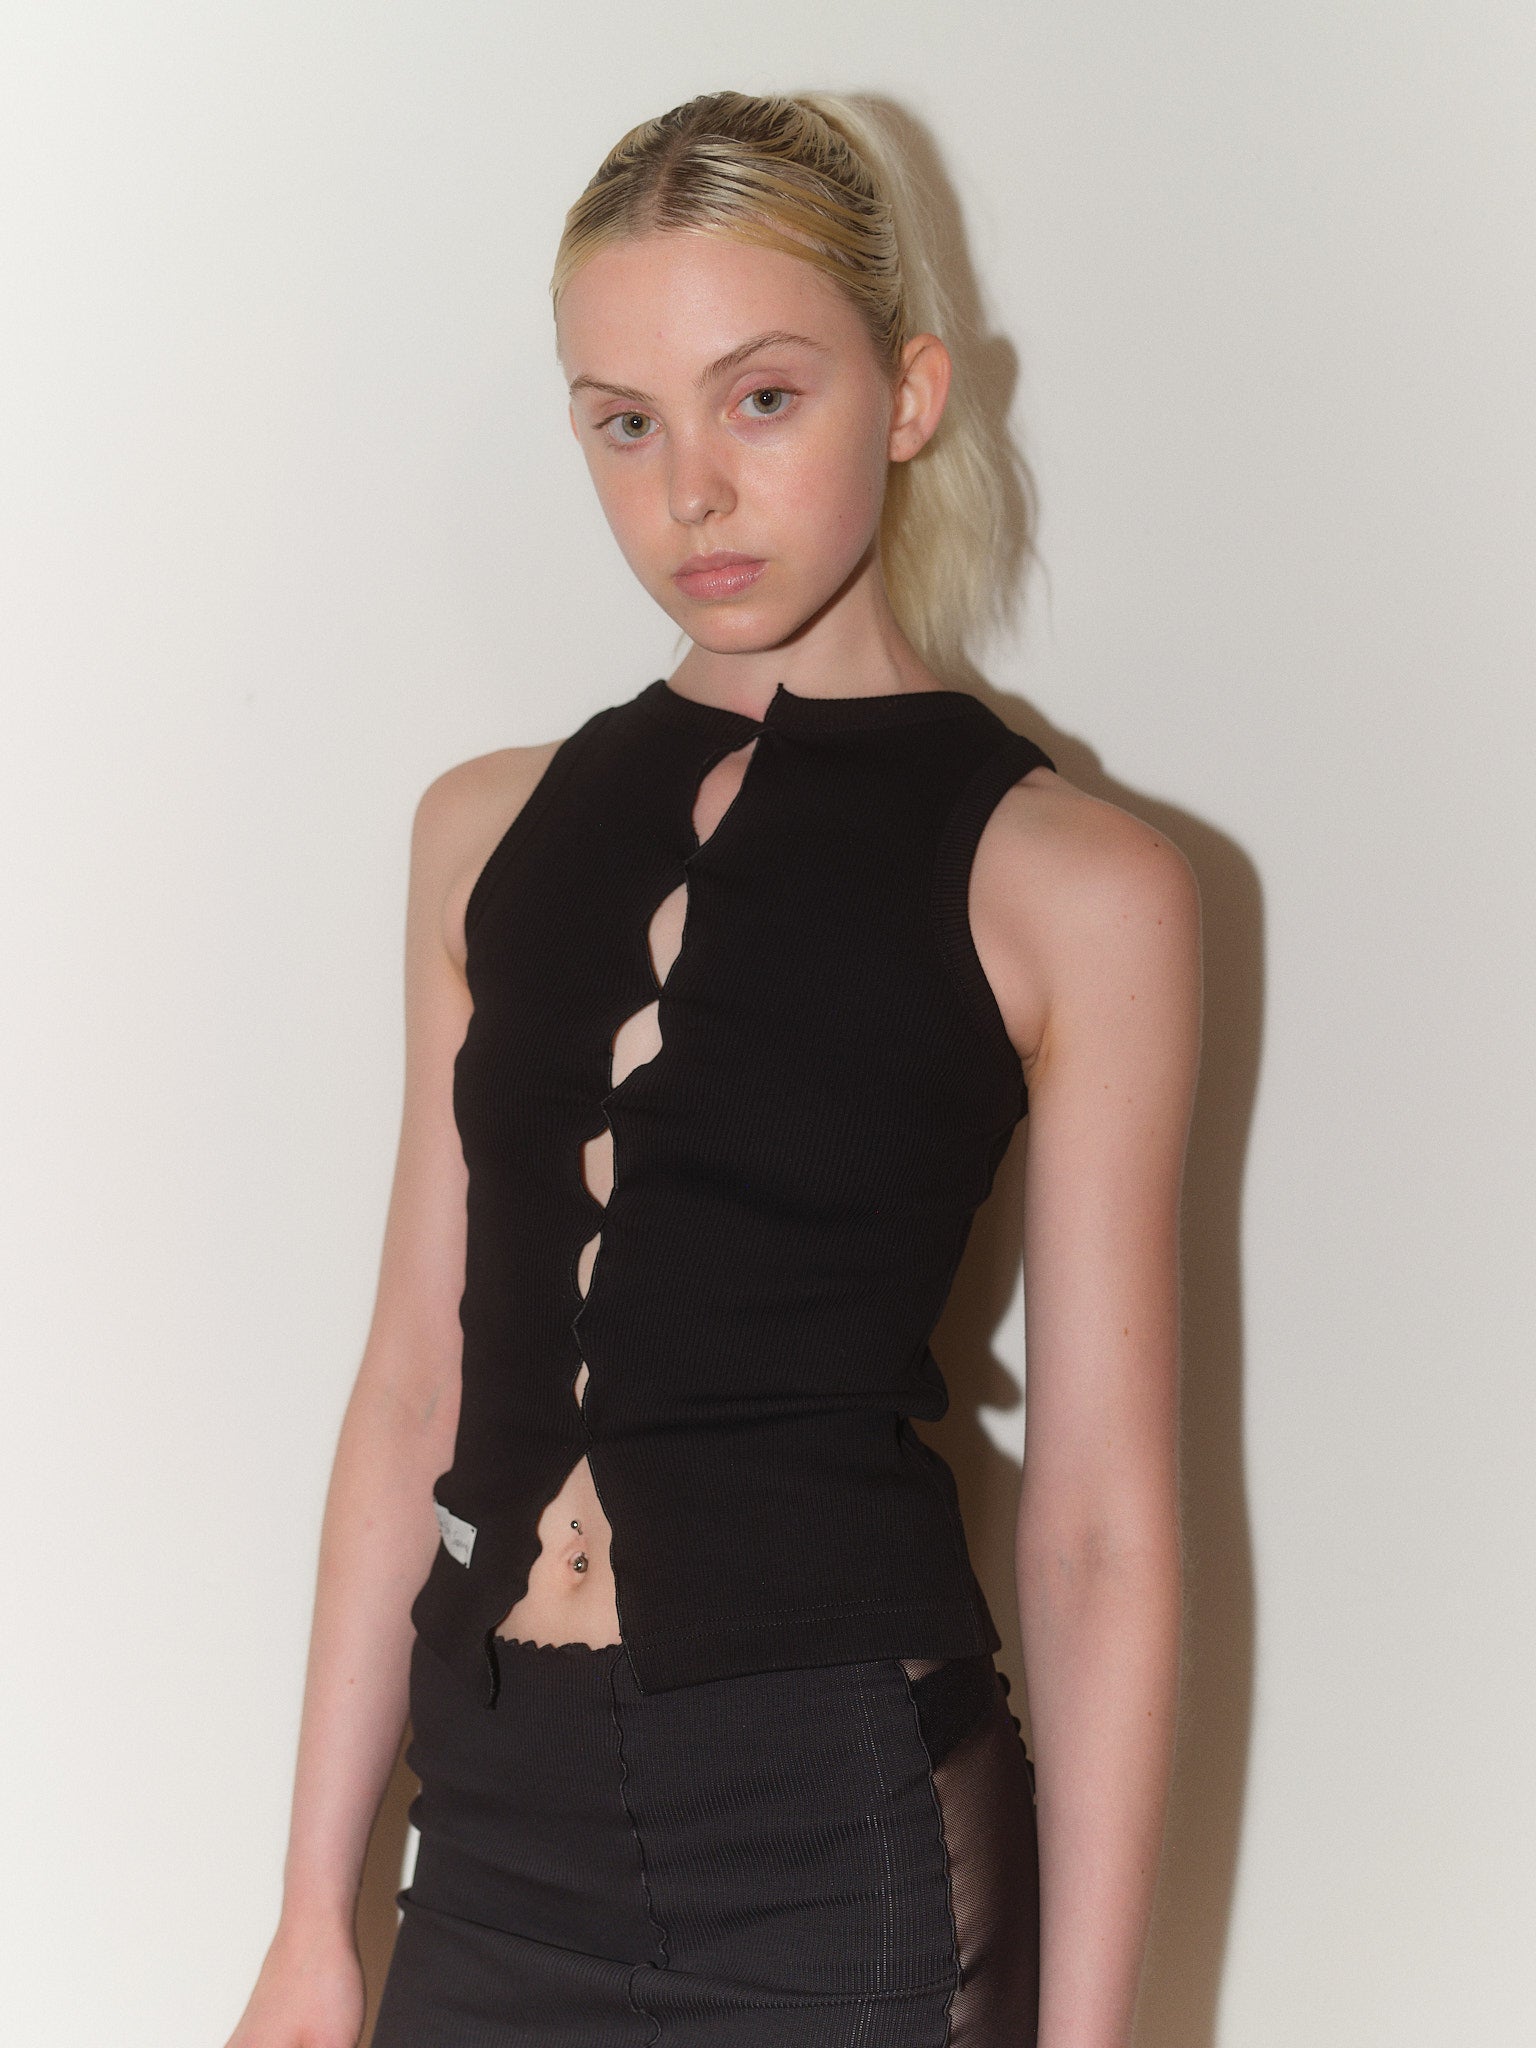 Draped Cotton Jersey Tank Top designed by Christina Seewald. Sustainable, designed and made in Europe.